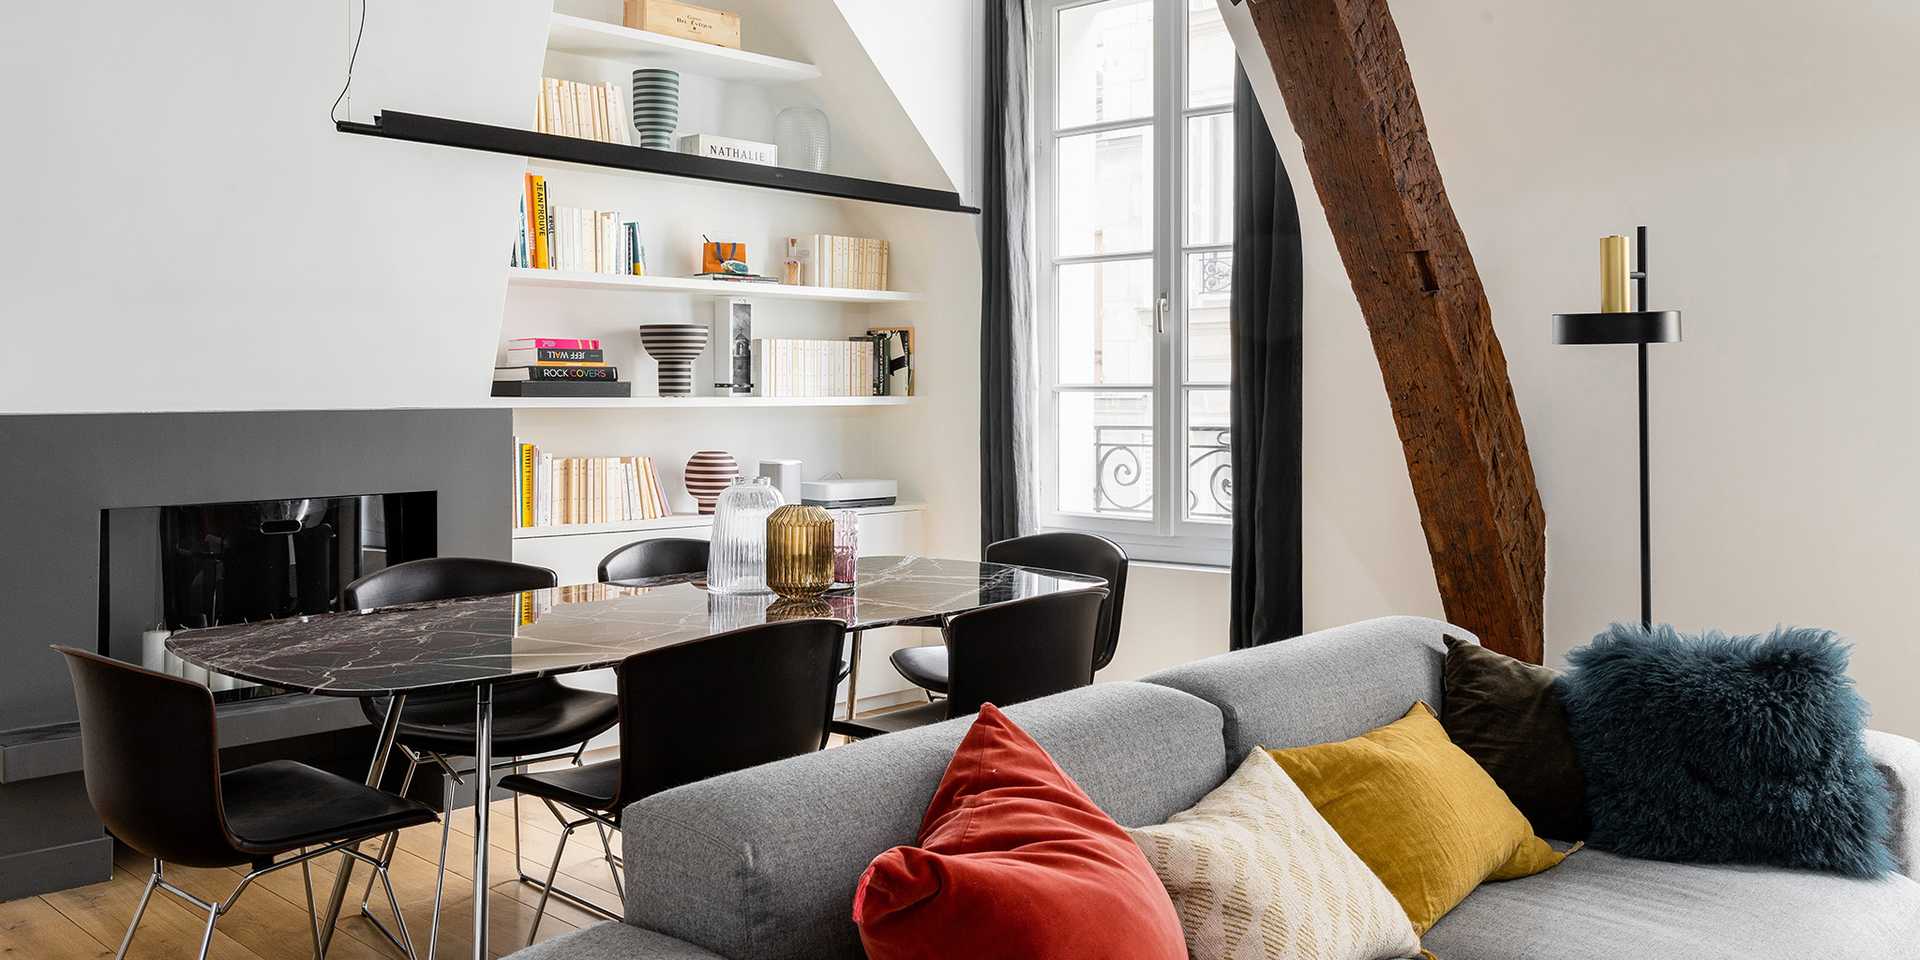 Renovation of an apartment in an old building in Bordeaux